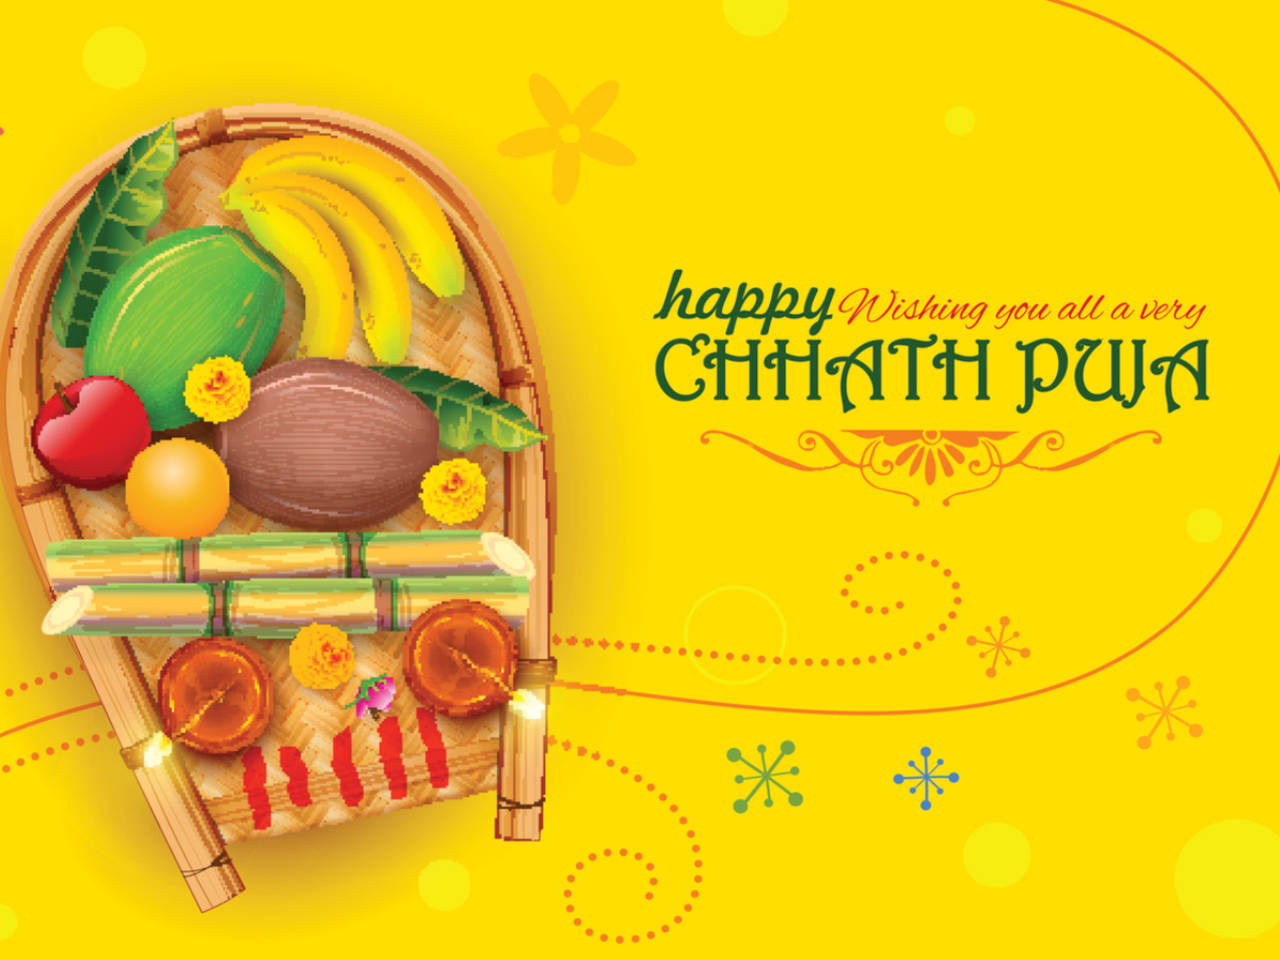 Chhath Puja Wallpapers - Wallpaper Cave